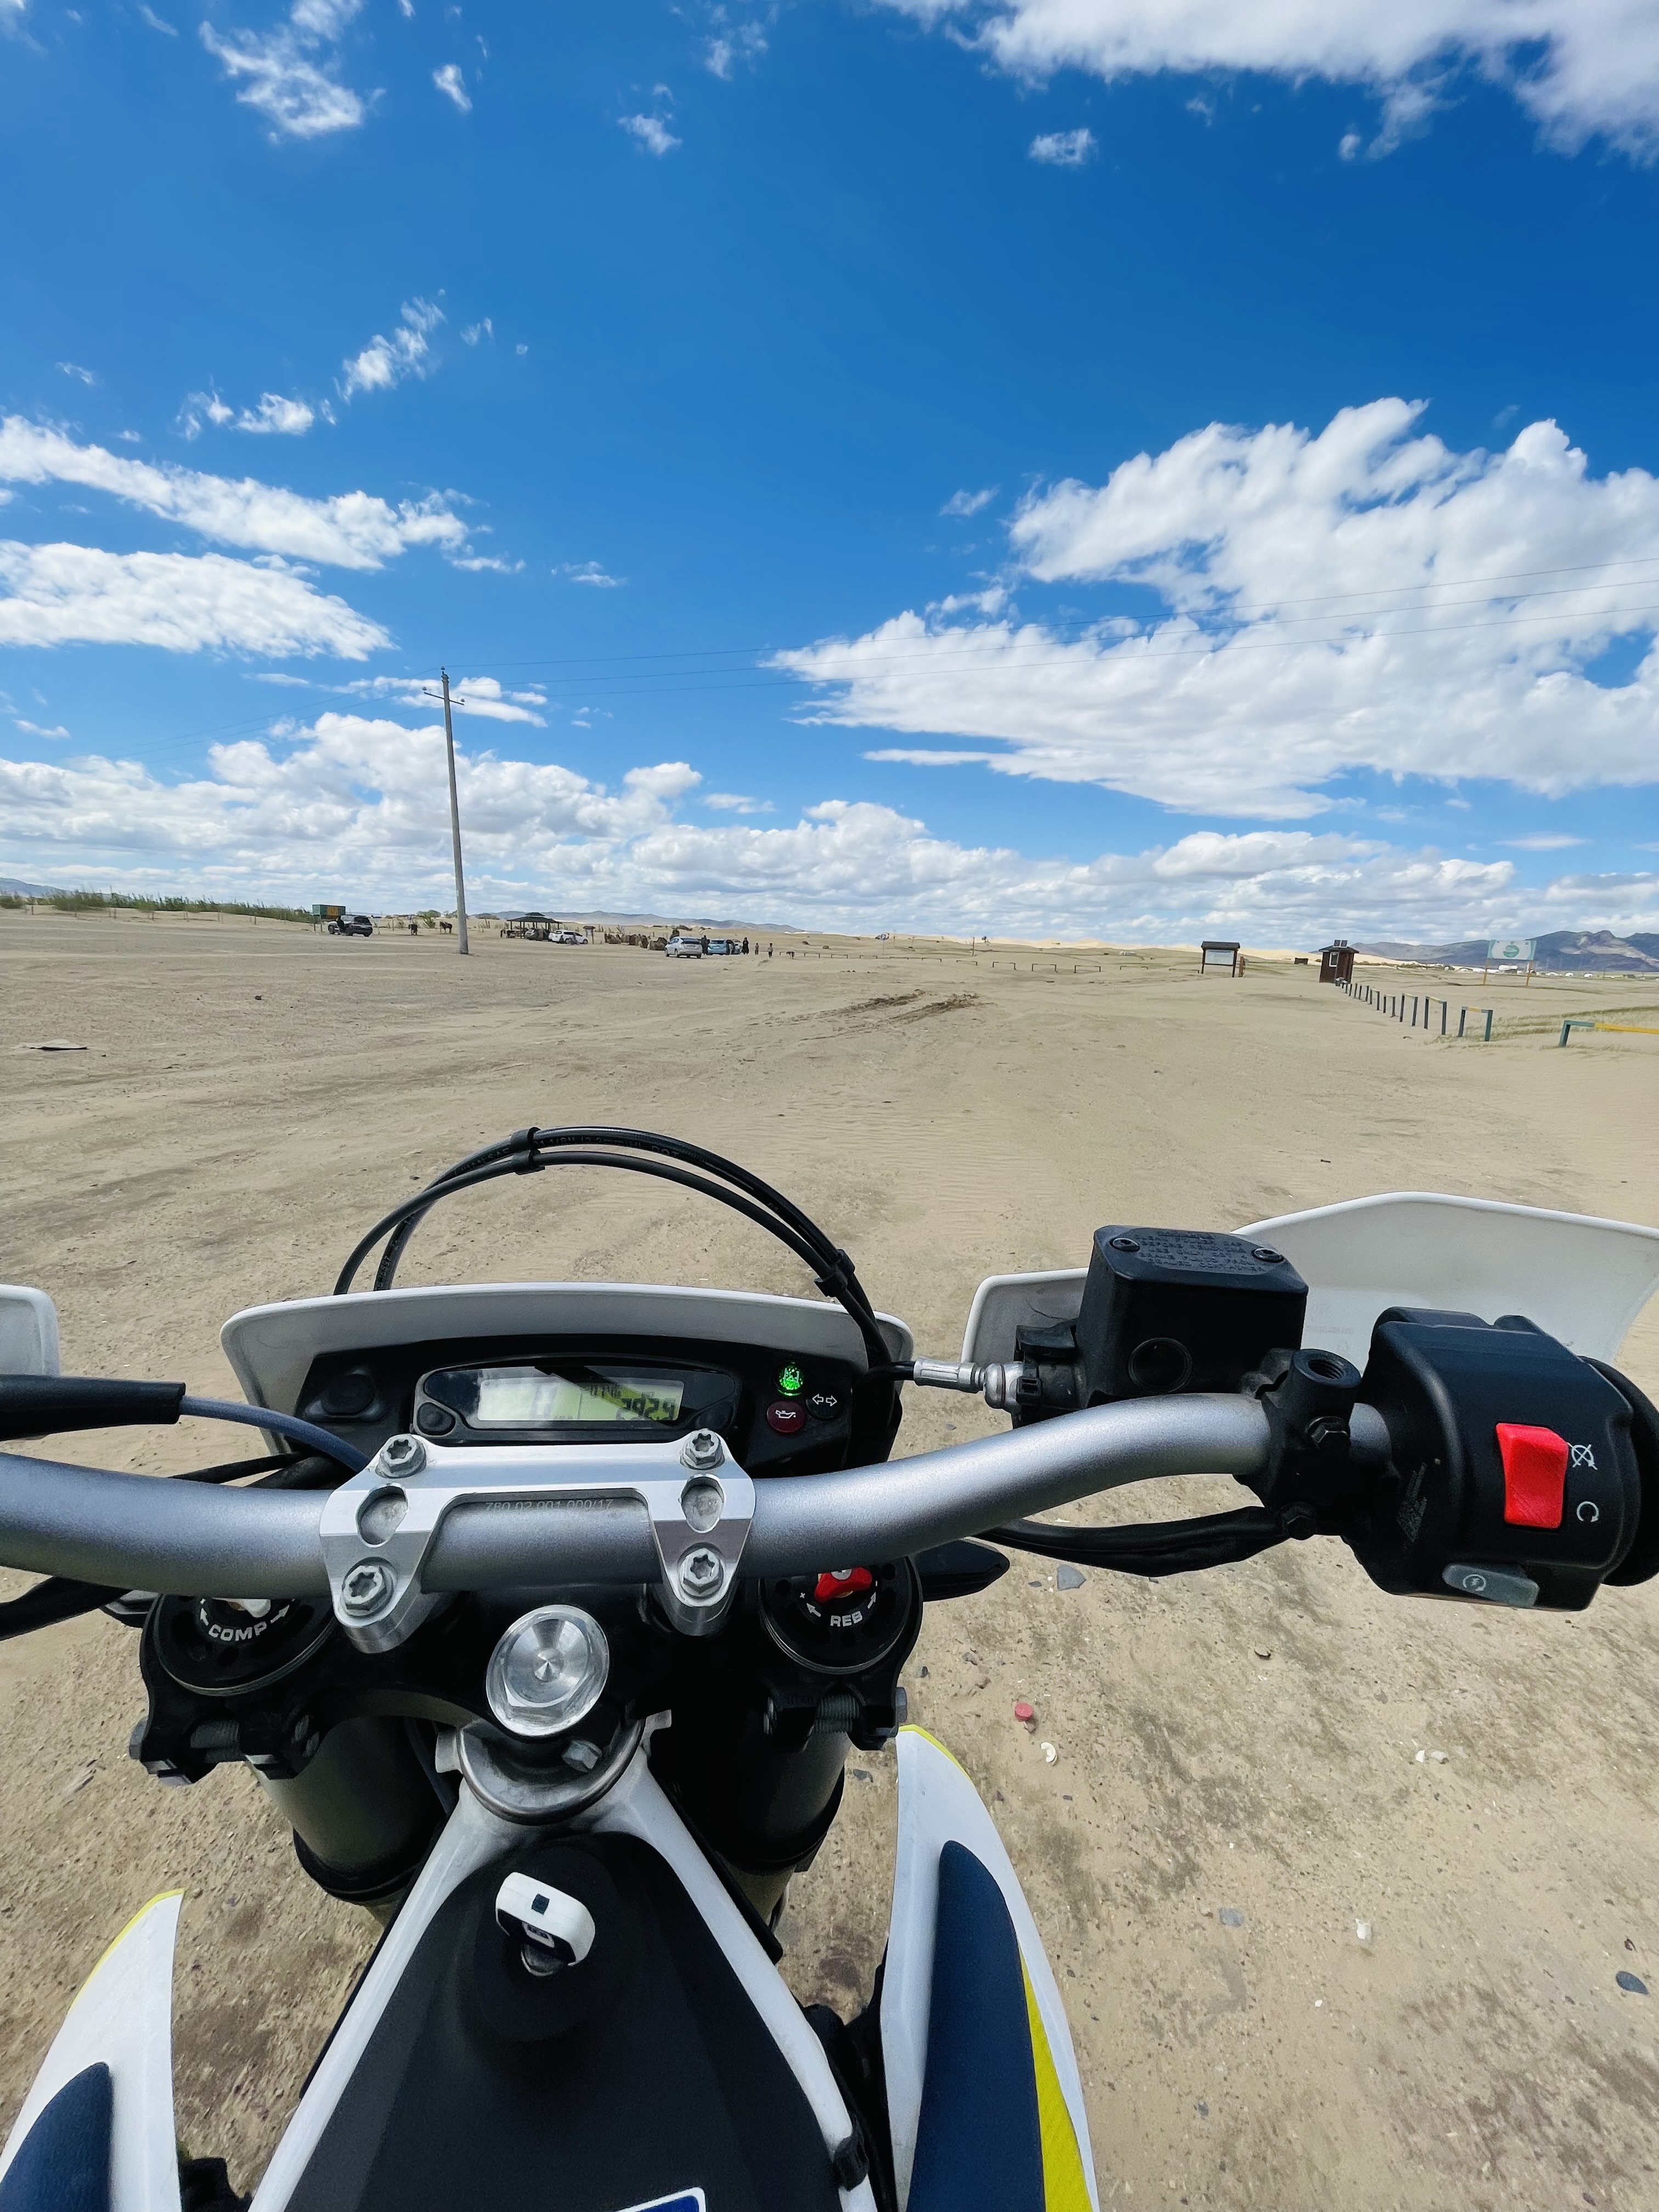 Motorcycle riding through the endless steppes of Mongolia